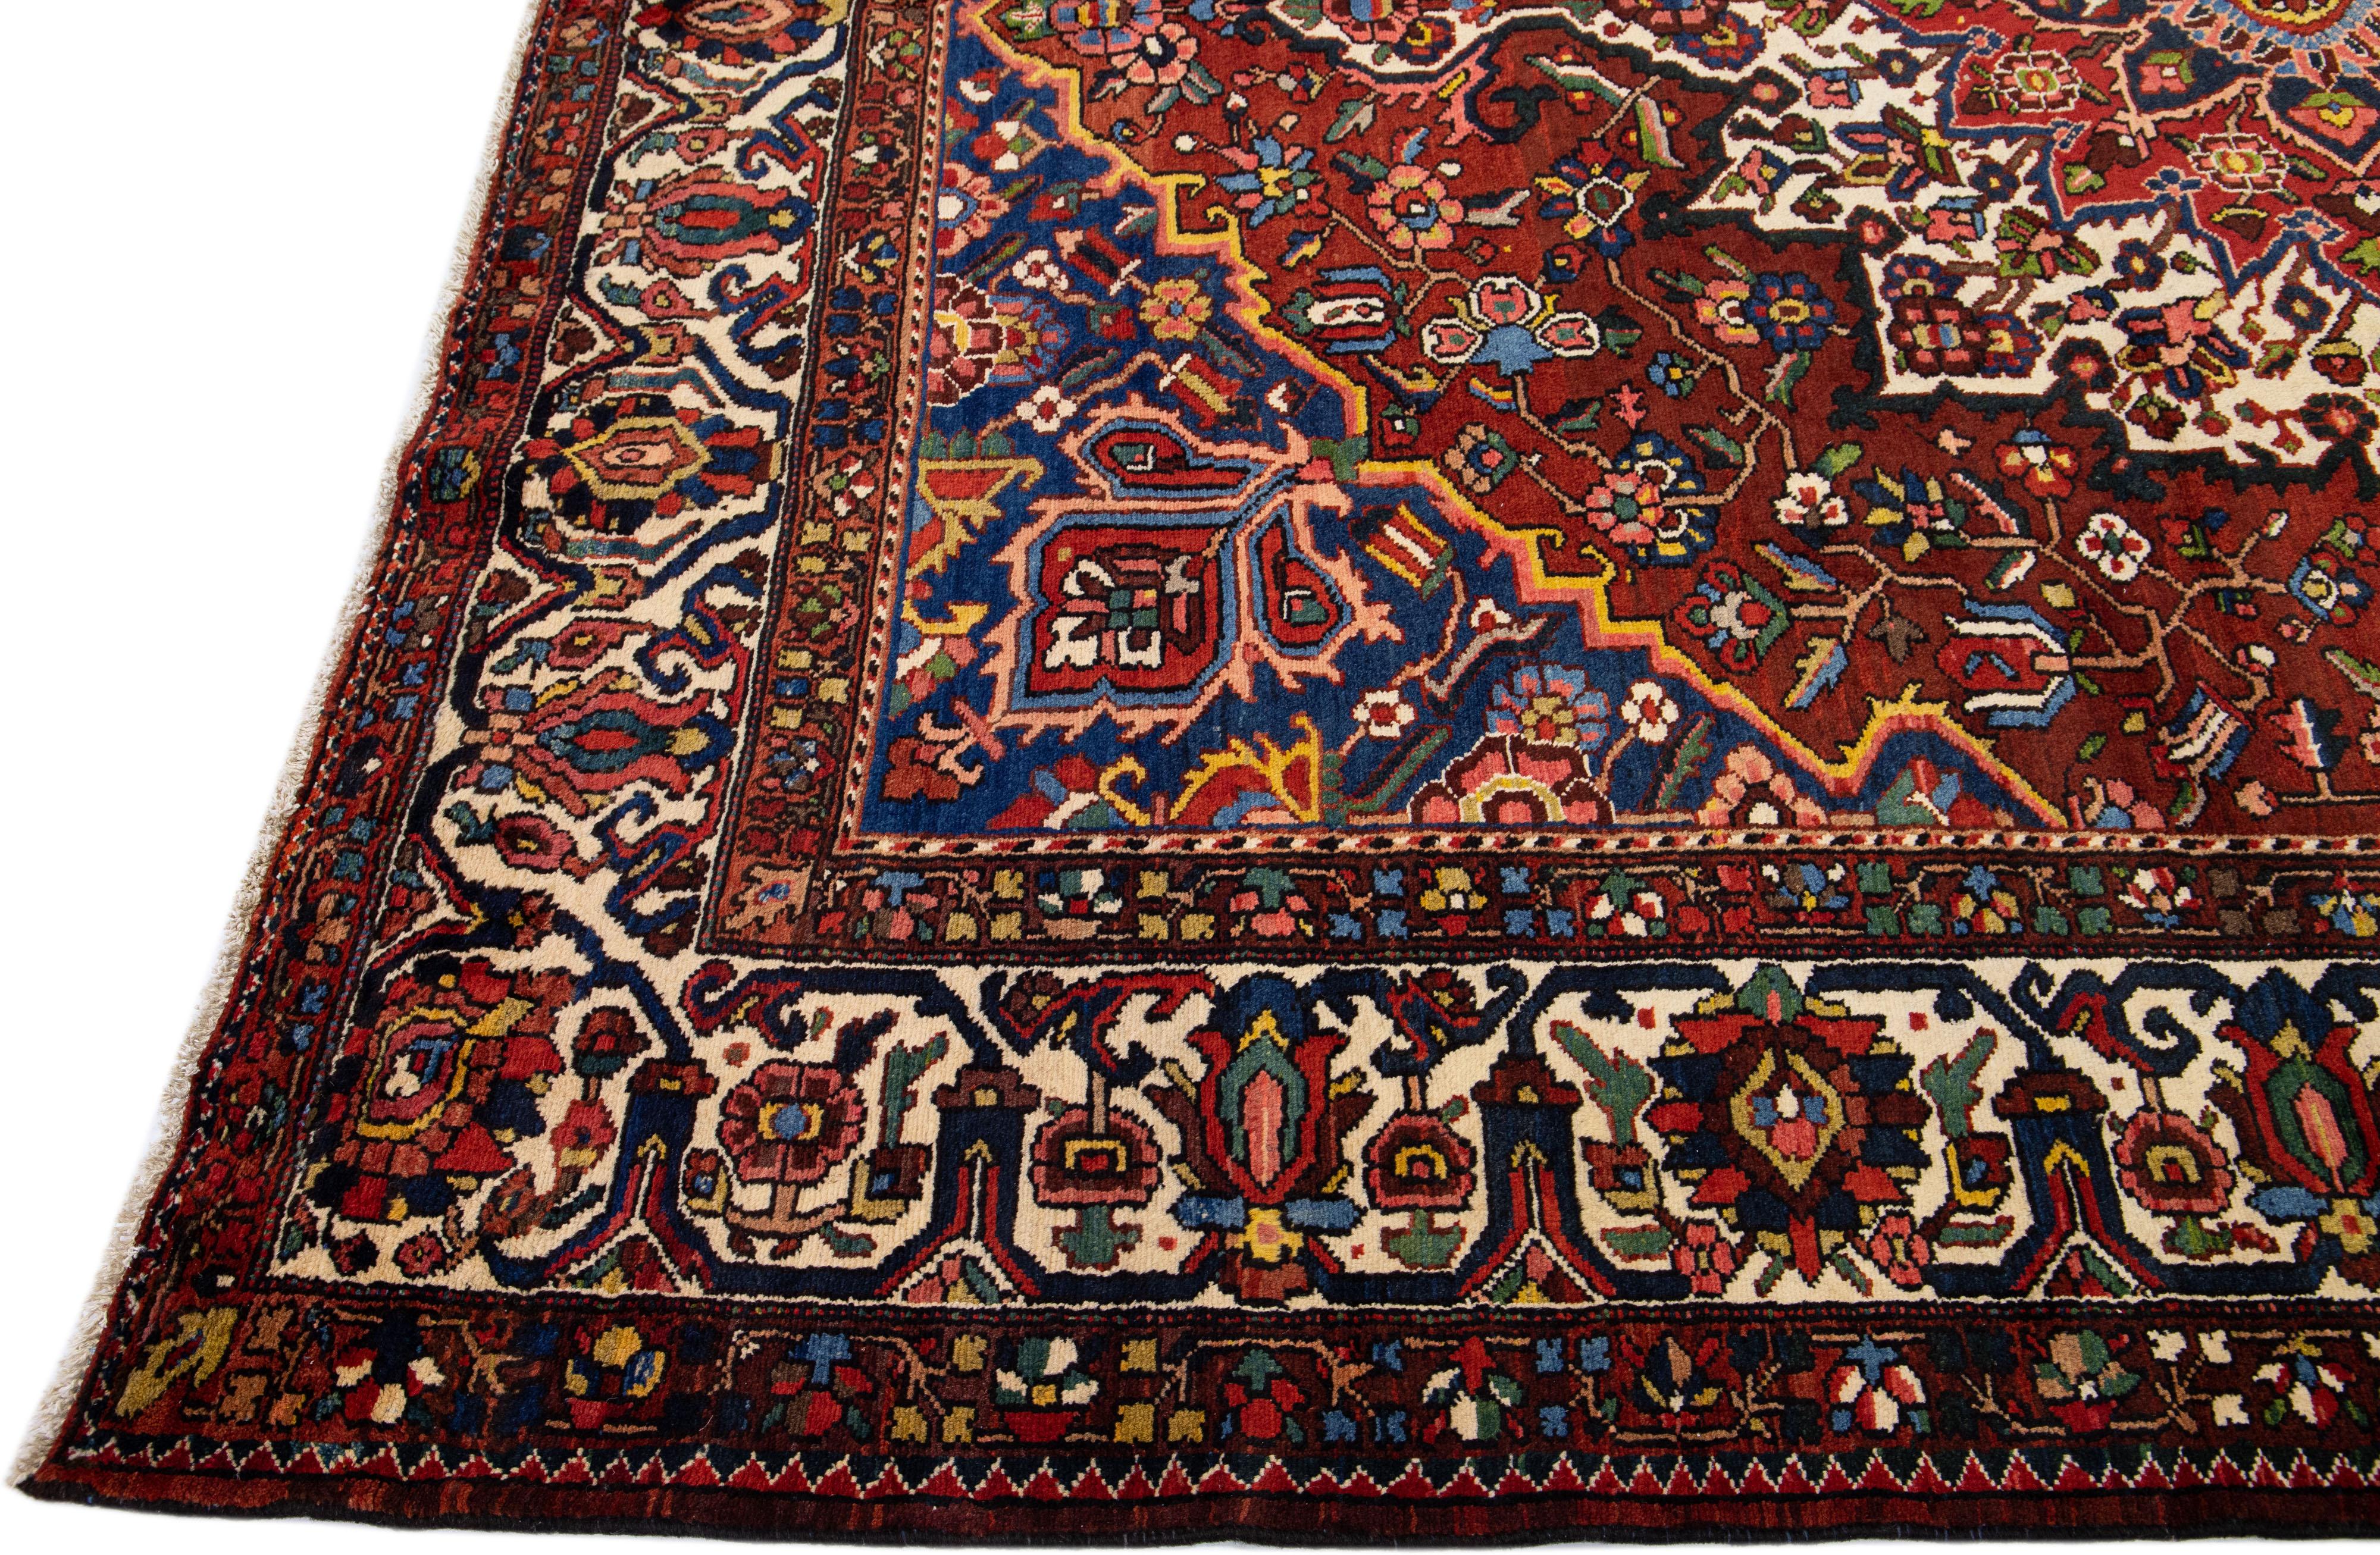 Beautiful Antique Bakhtiari hand-knotted wool rug with a red field. This Persian piece has an all-over multicolor accent in a gorgeous classic rosette Medallion motif.

This rug measures 10'9